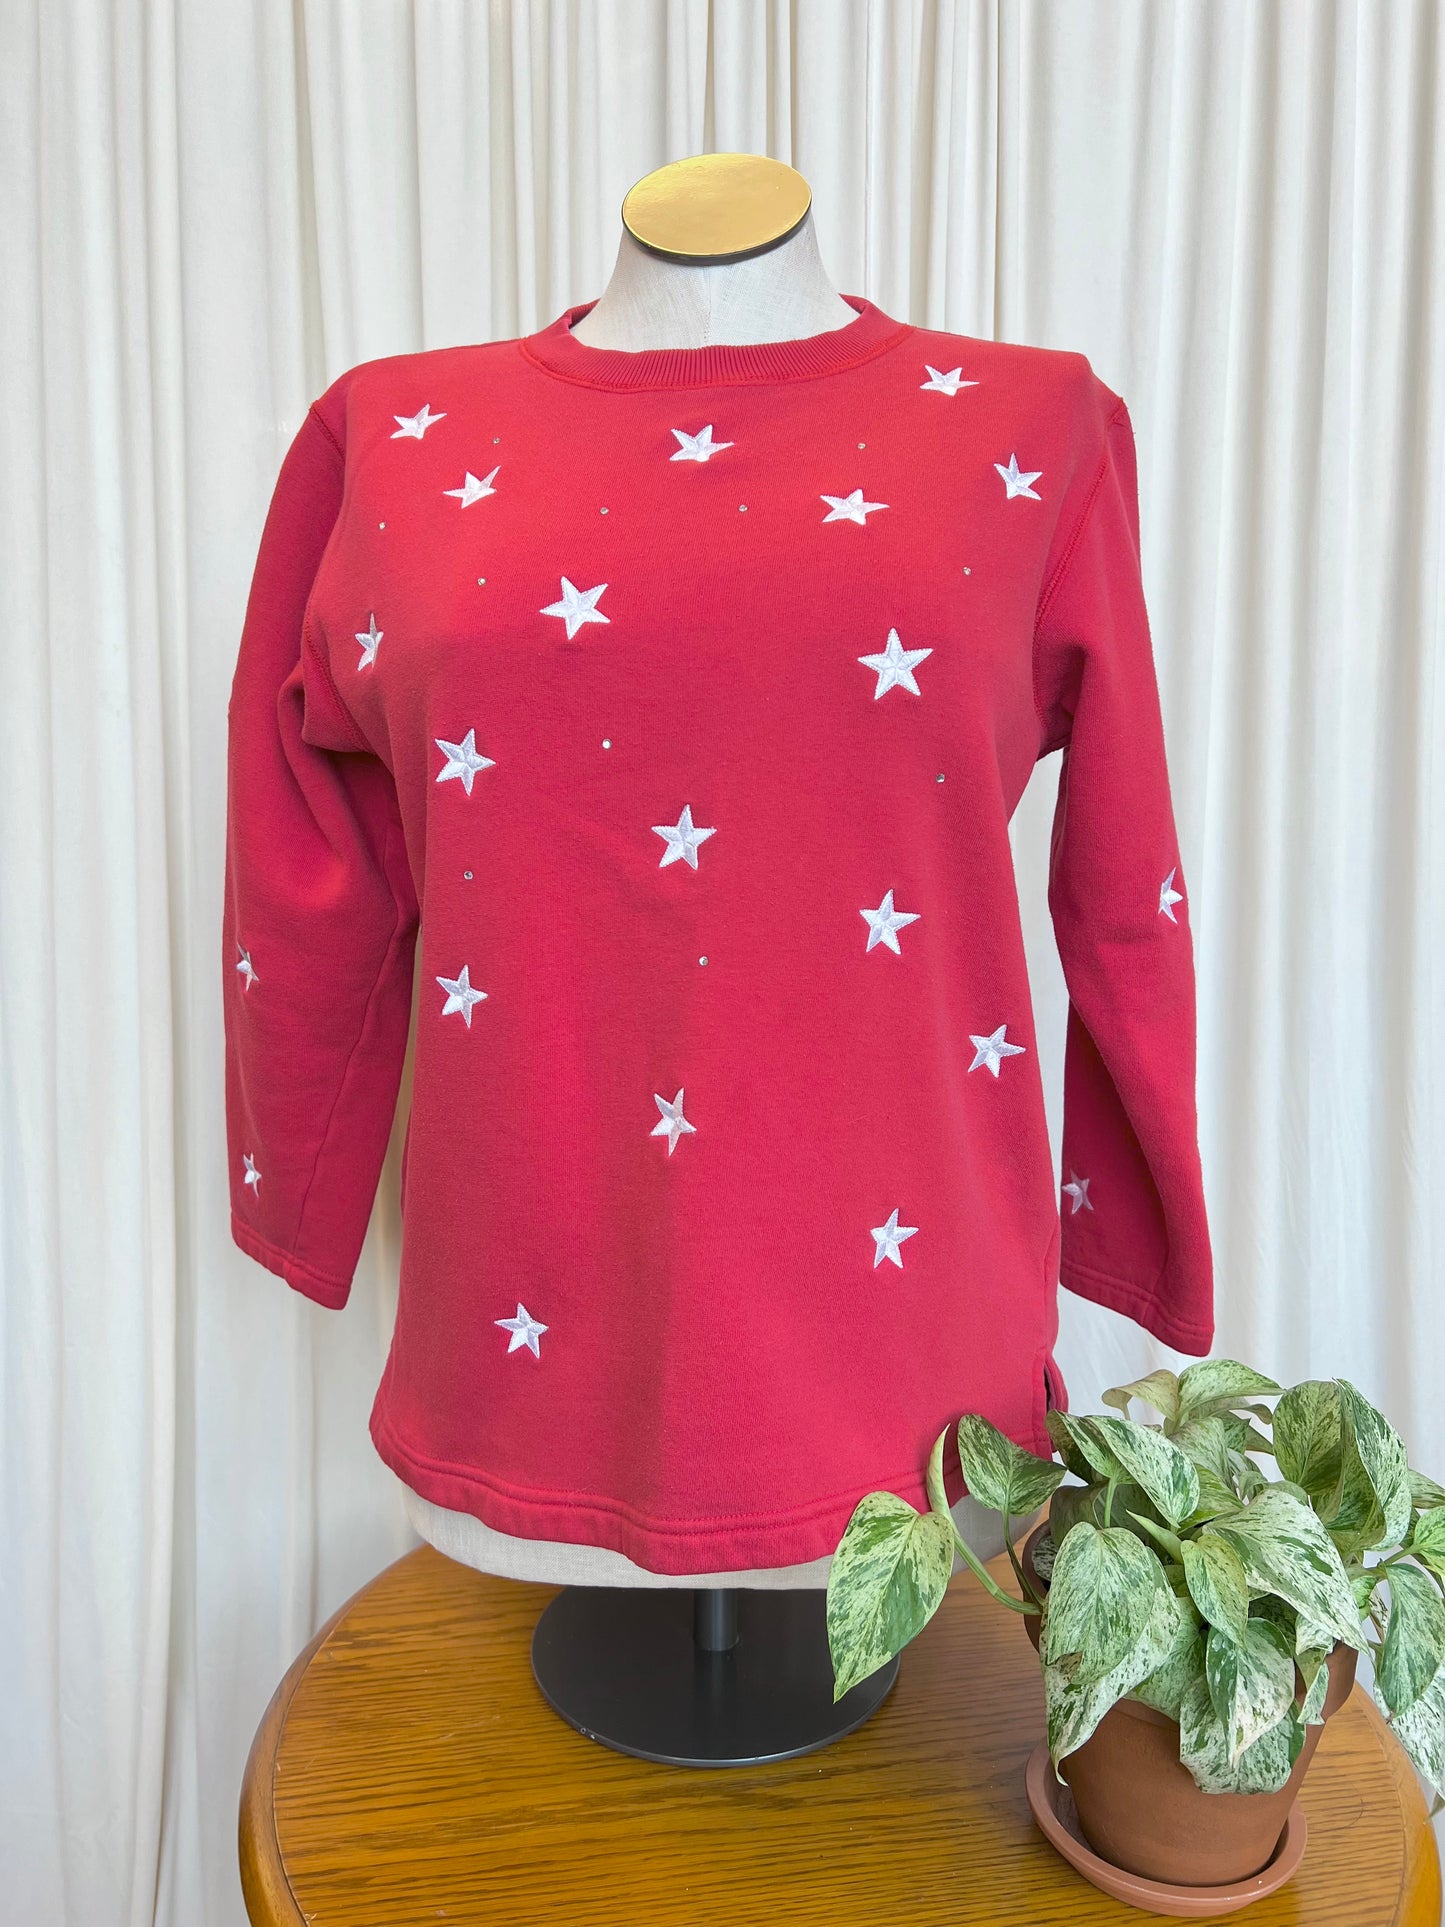 Star Patterned Red Crewneck - Small